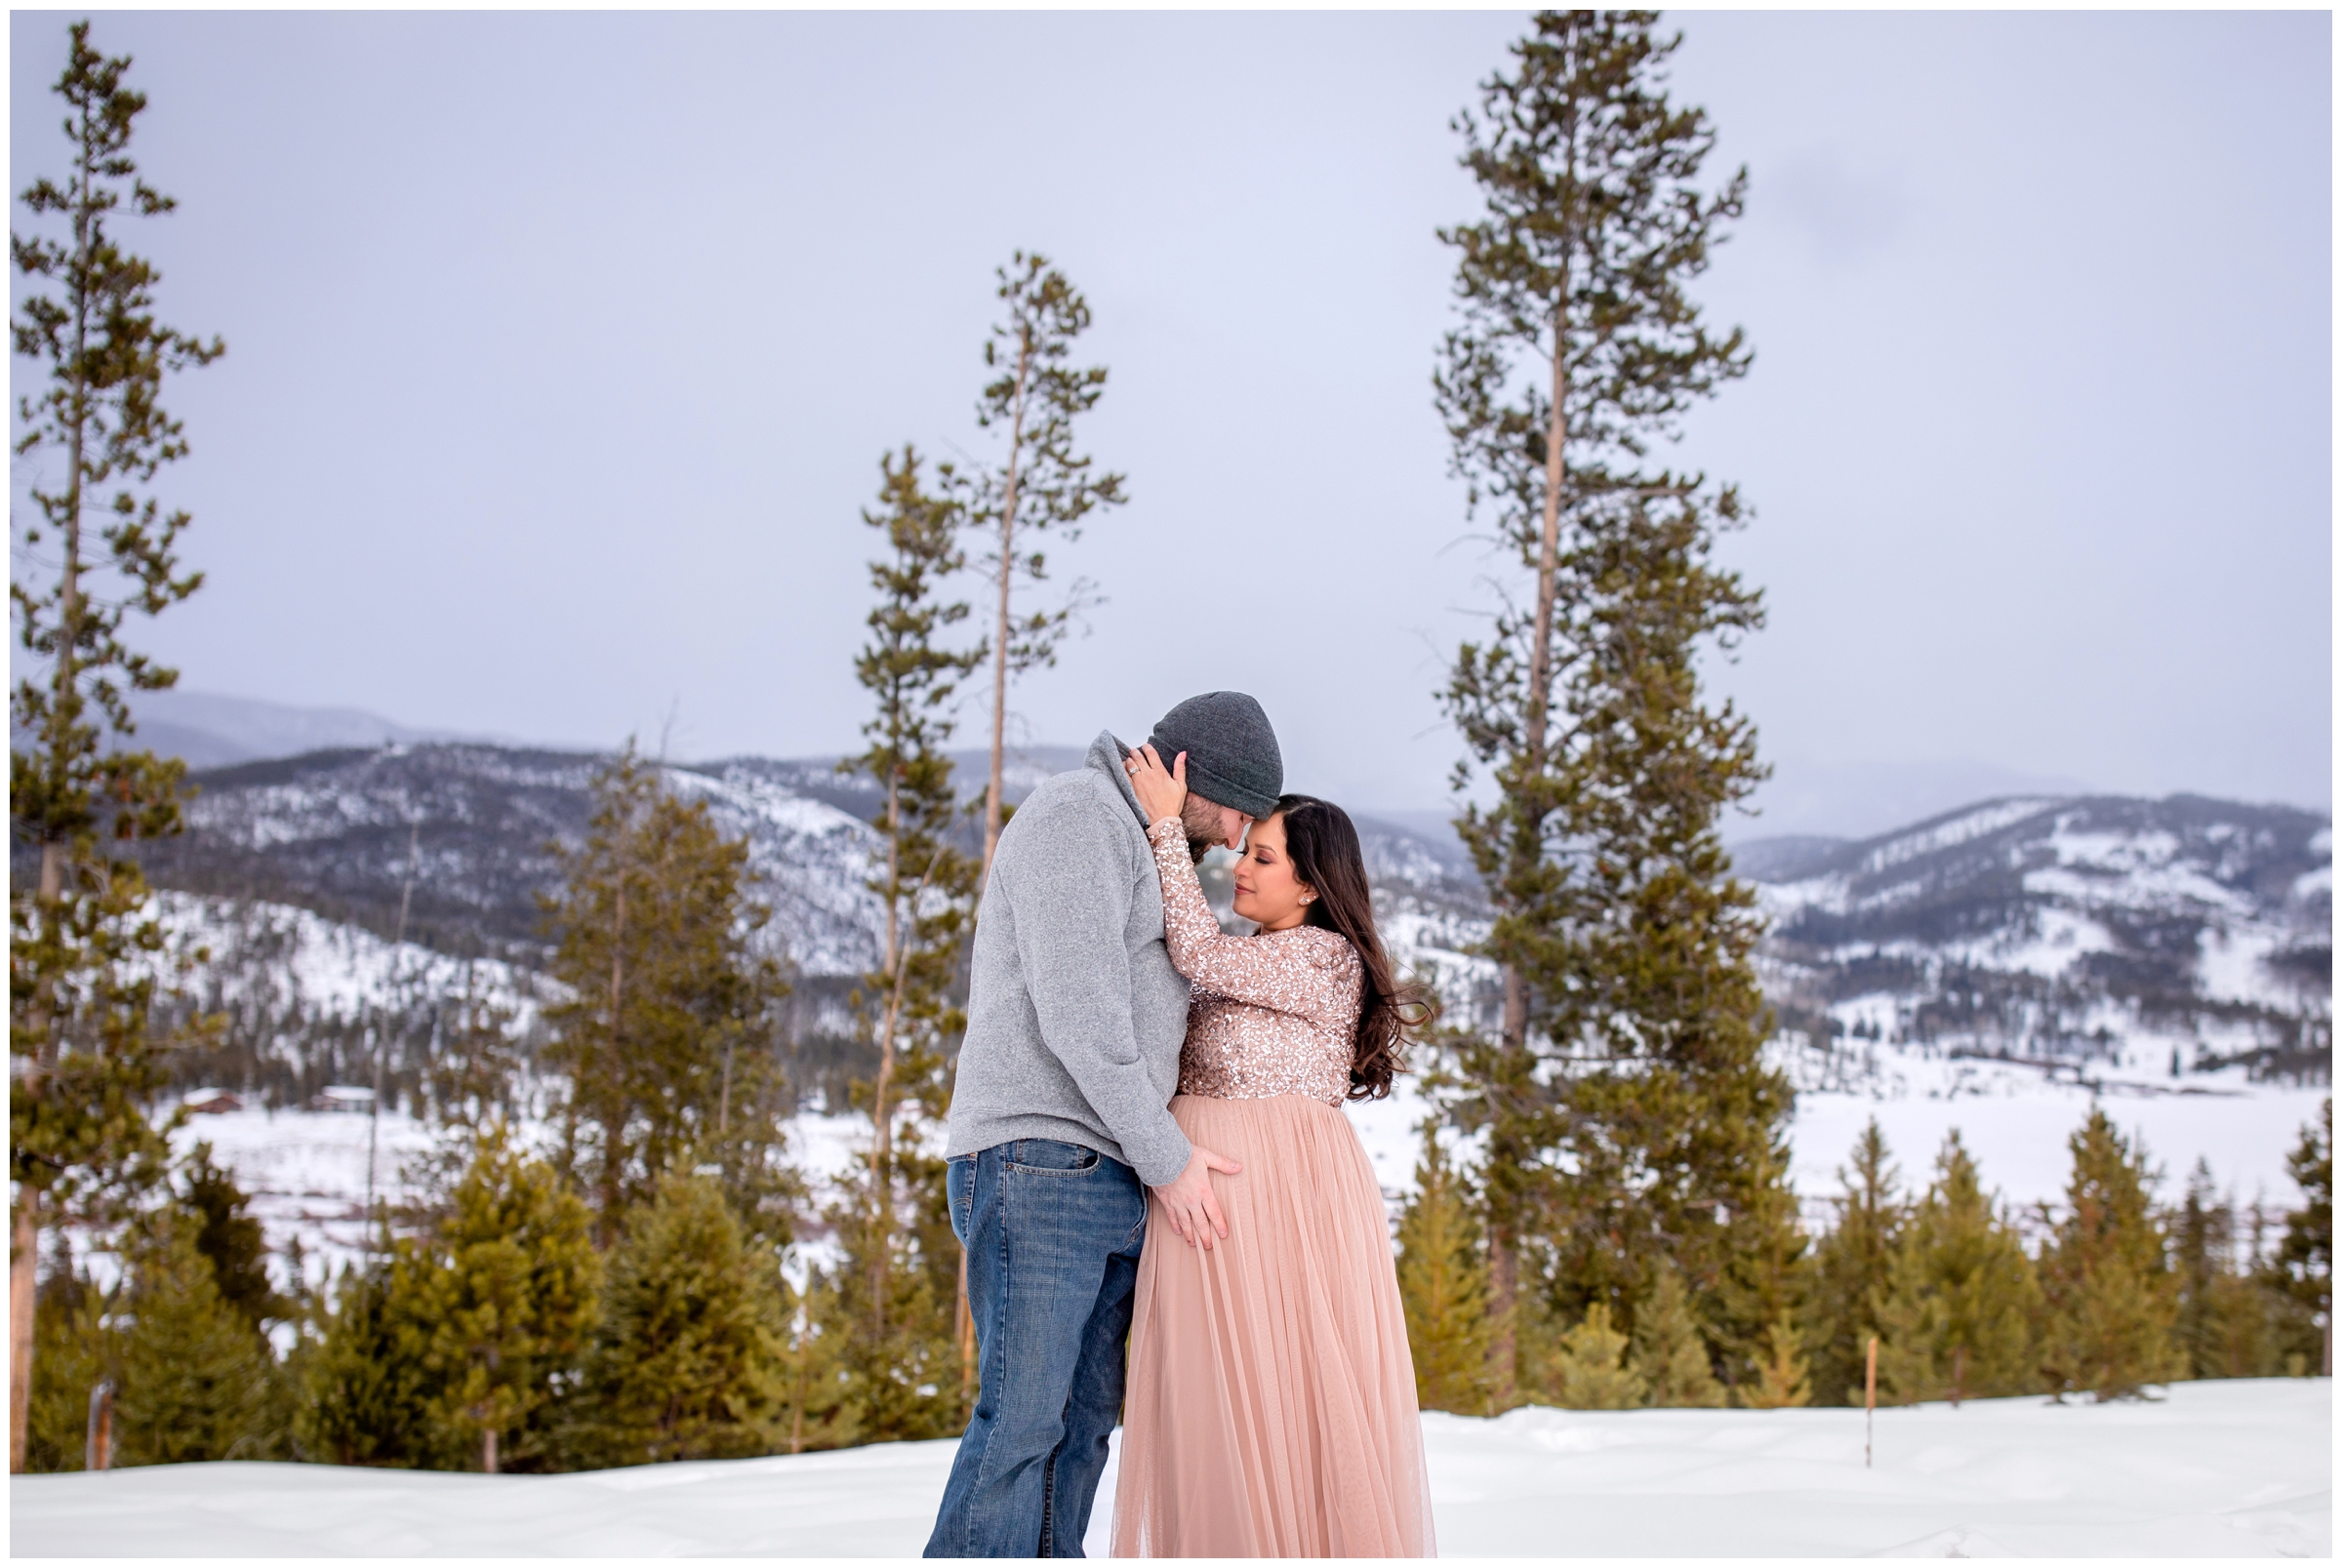 Colorado winter maternity portraits in the snow at Devil's Thumb Ranch by Winter Park photographer Plum Pretty Photography